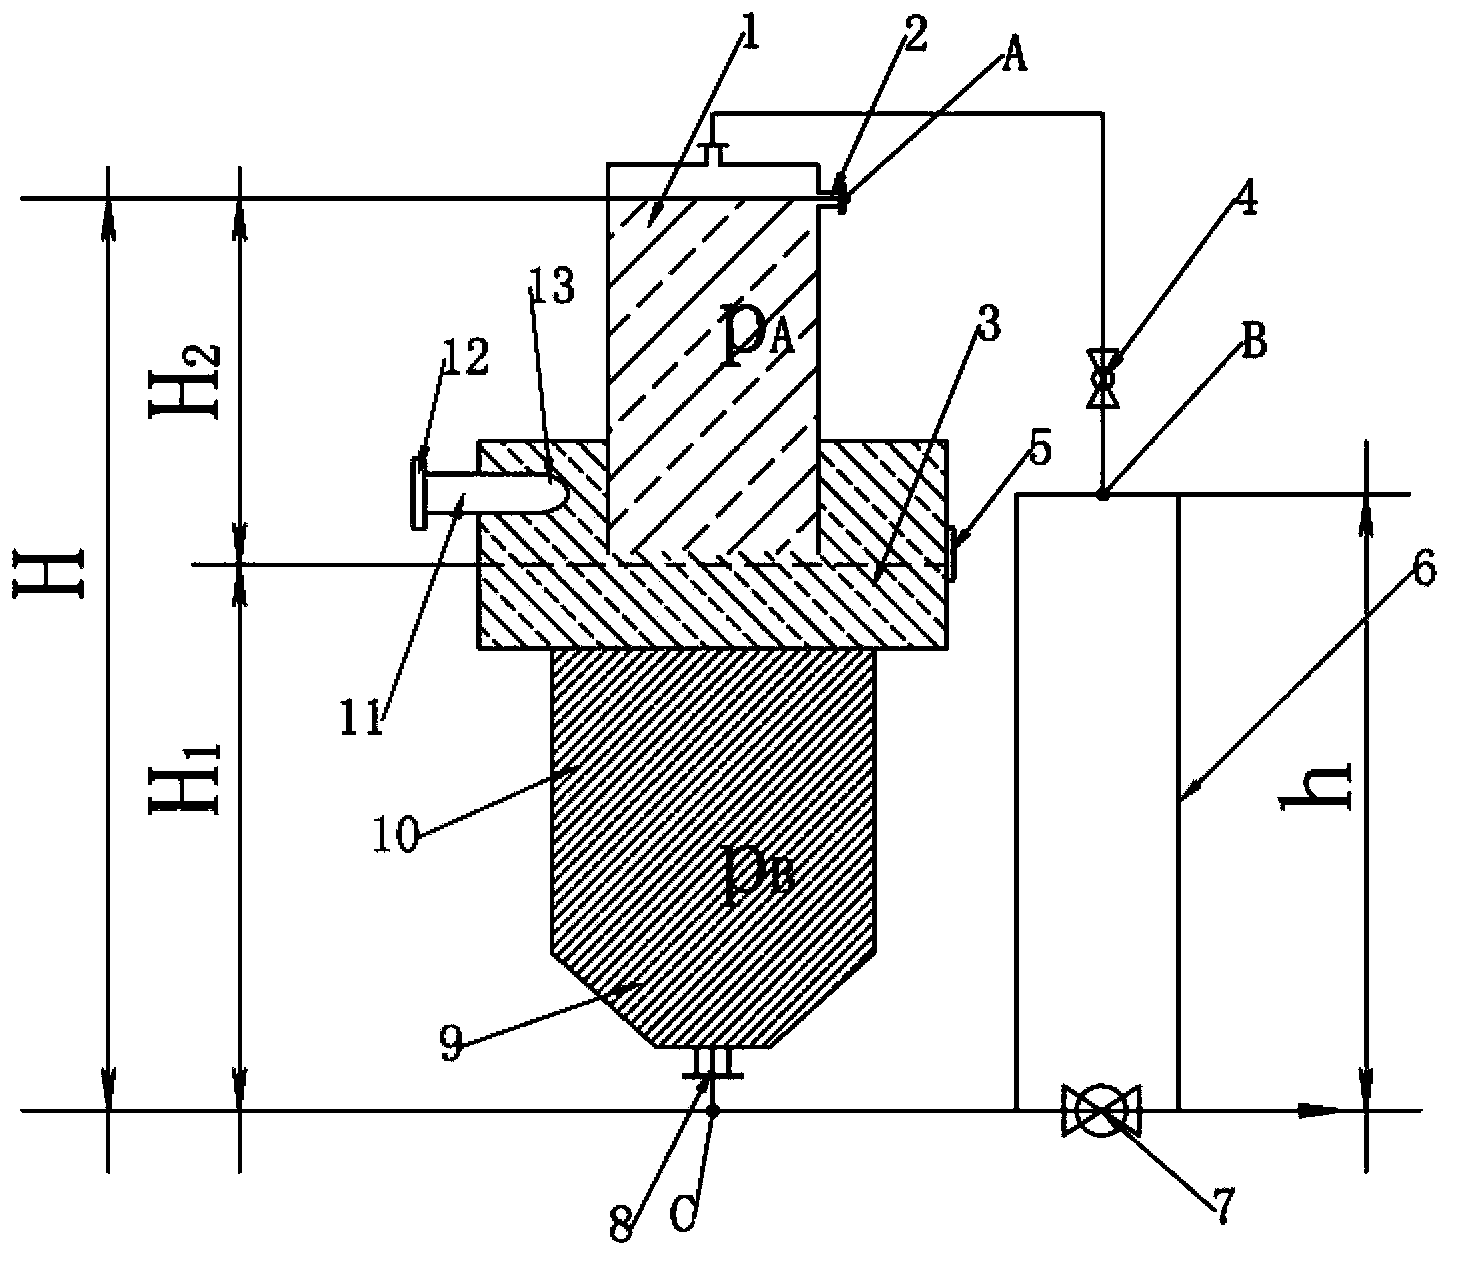 Equipment for continuously and automatically separating mutually insoluble liquid mixture